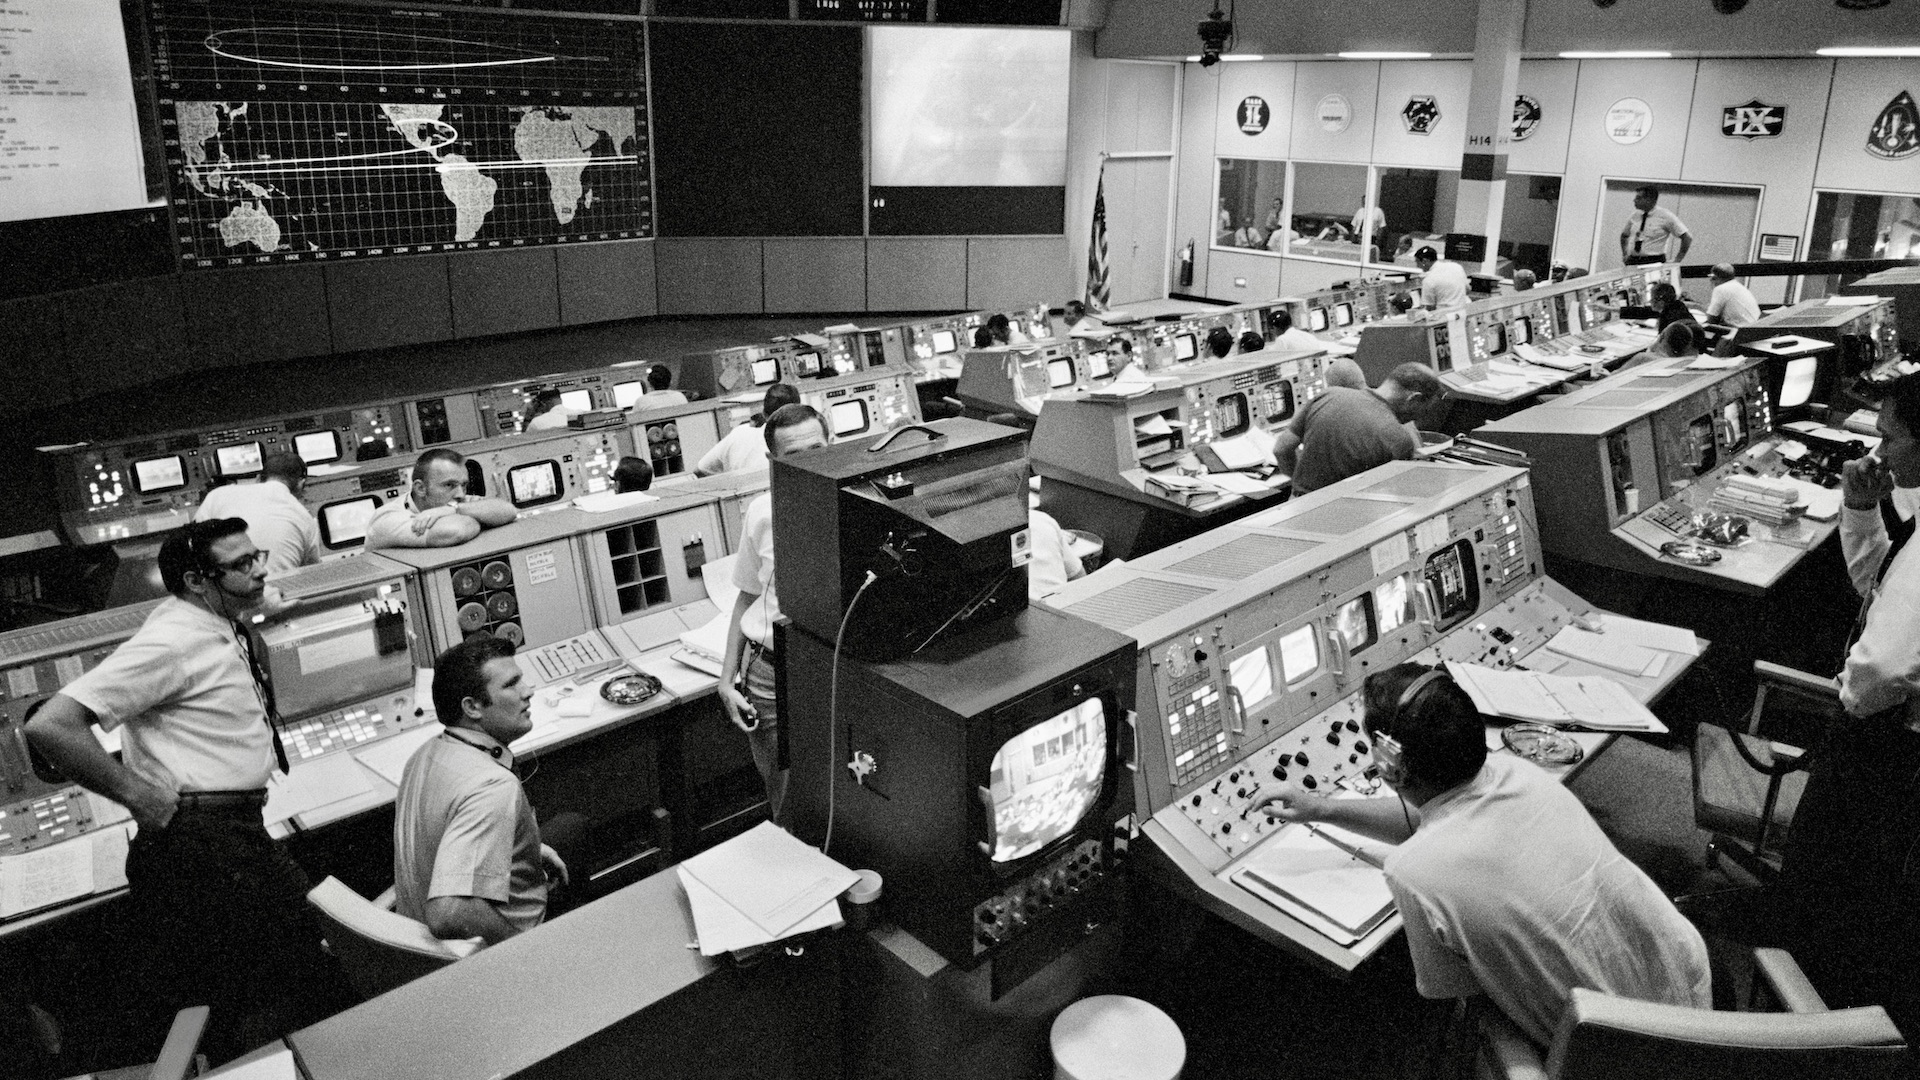 Mission Operations Control Room (MOCR) activities during Apollo 11's re-entry on July 24, 1969. NASA